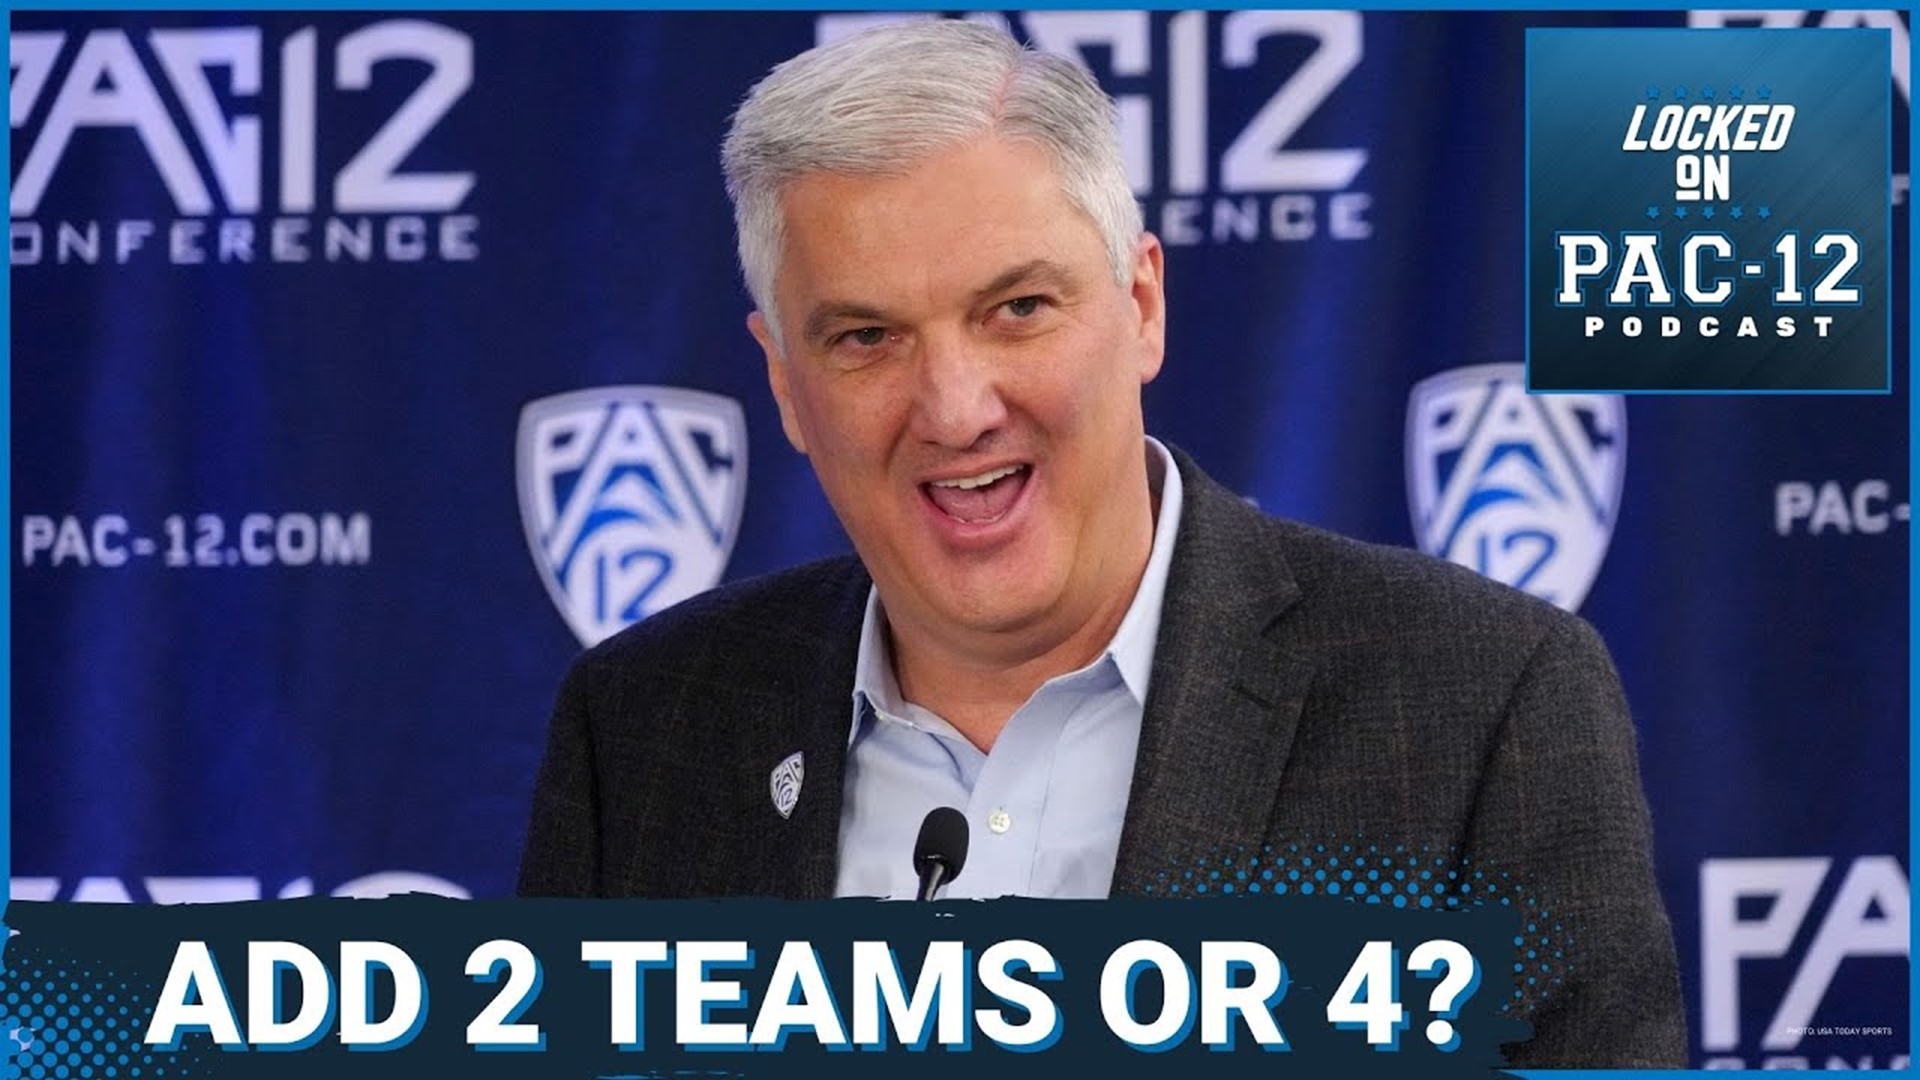 With the media rights deal negotiations ongoing, the potential of expansion continues to loom large for the Pac-12.